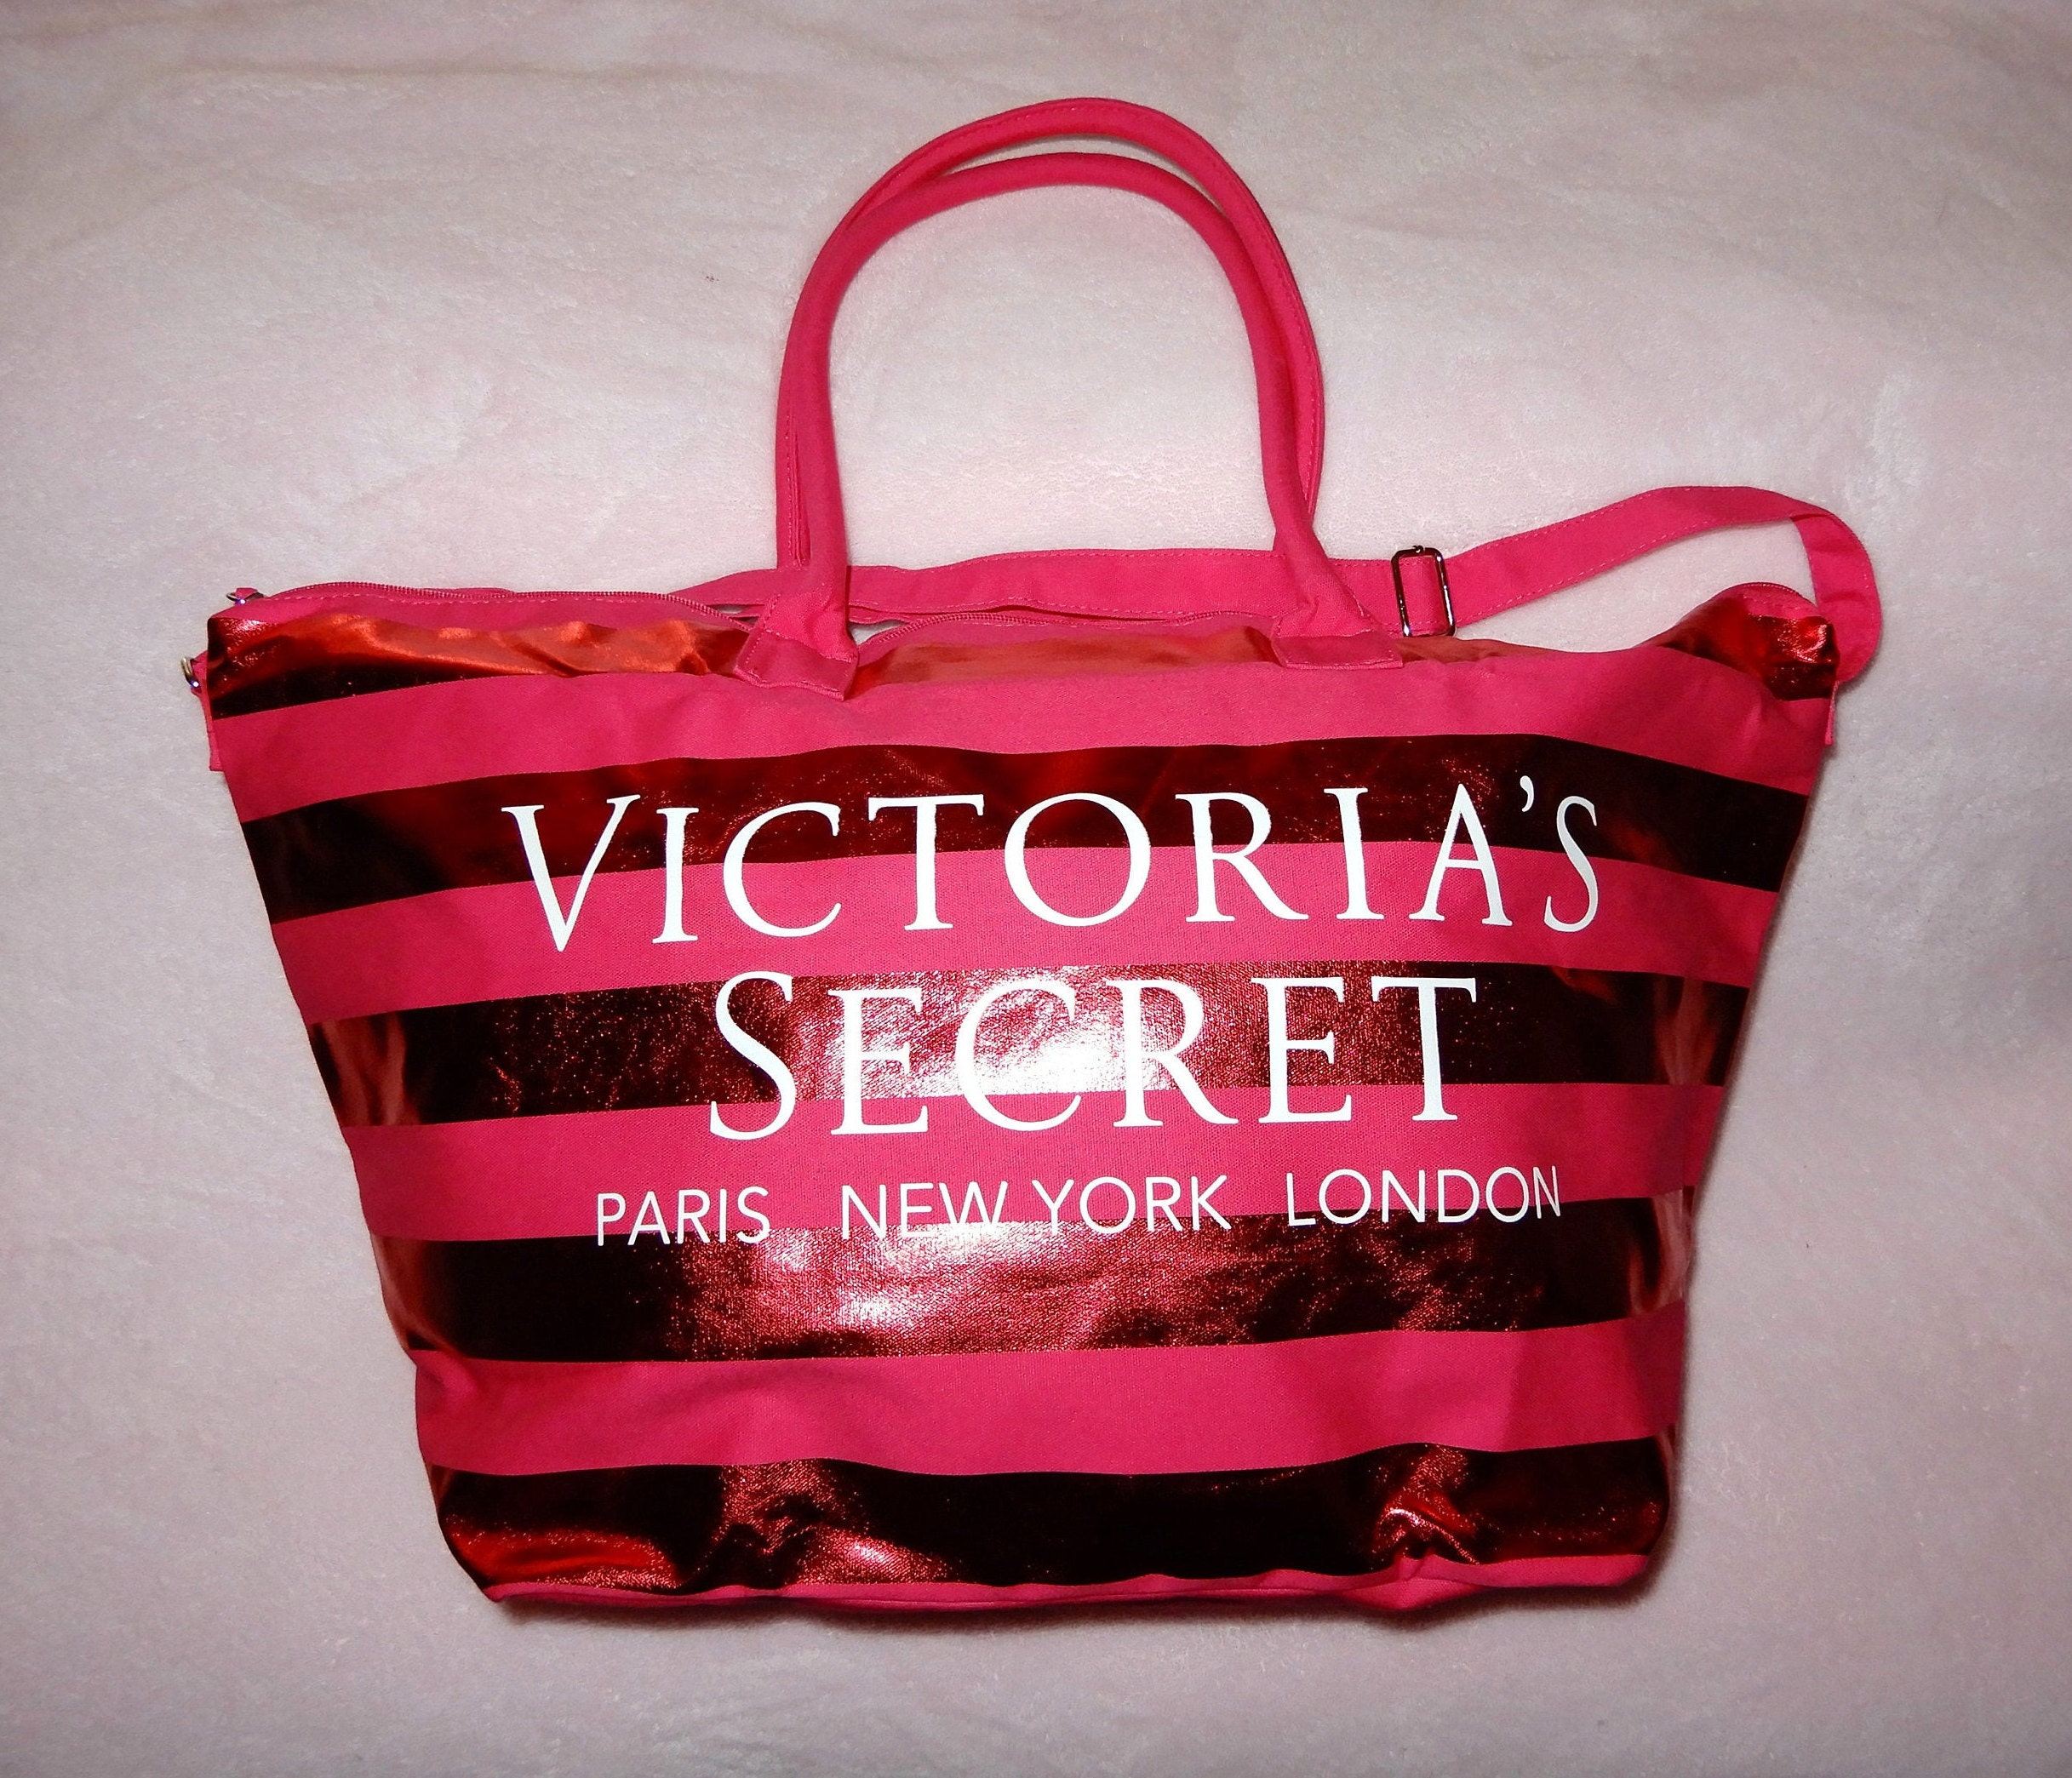 Victorias Secret Blush Tote Buy Victorias Secret Blush Tote Online at  Best Price in India  Nykaa